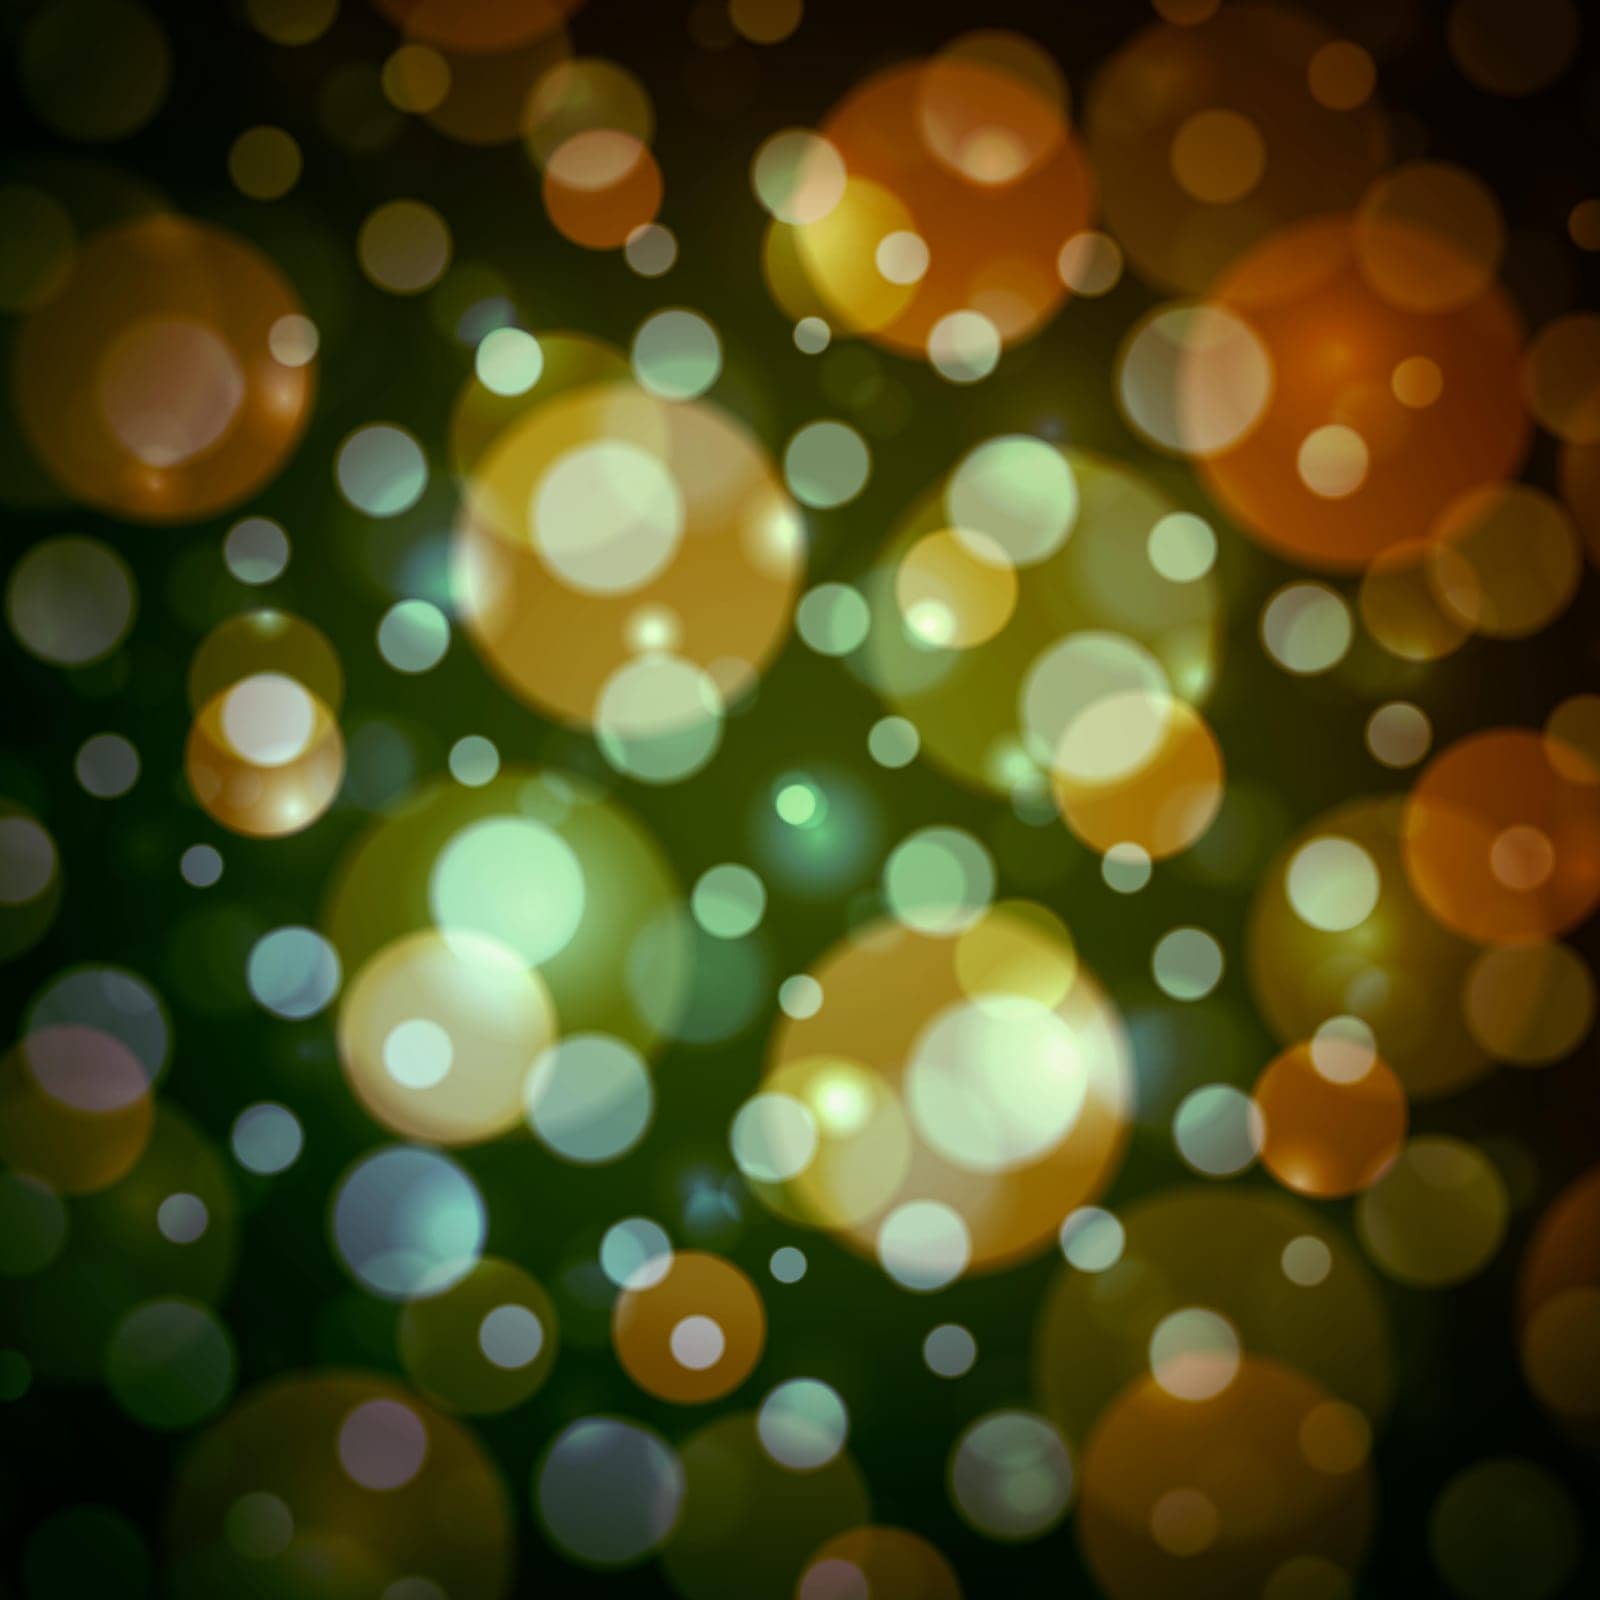 Abstract Bokeh Lights Background in Warm Hues by ProVectors